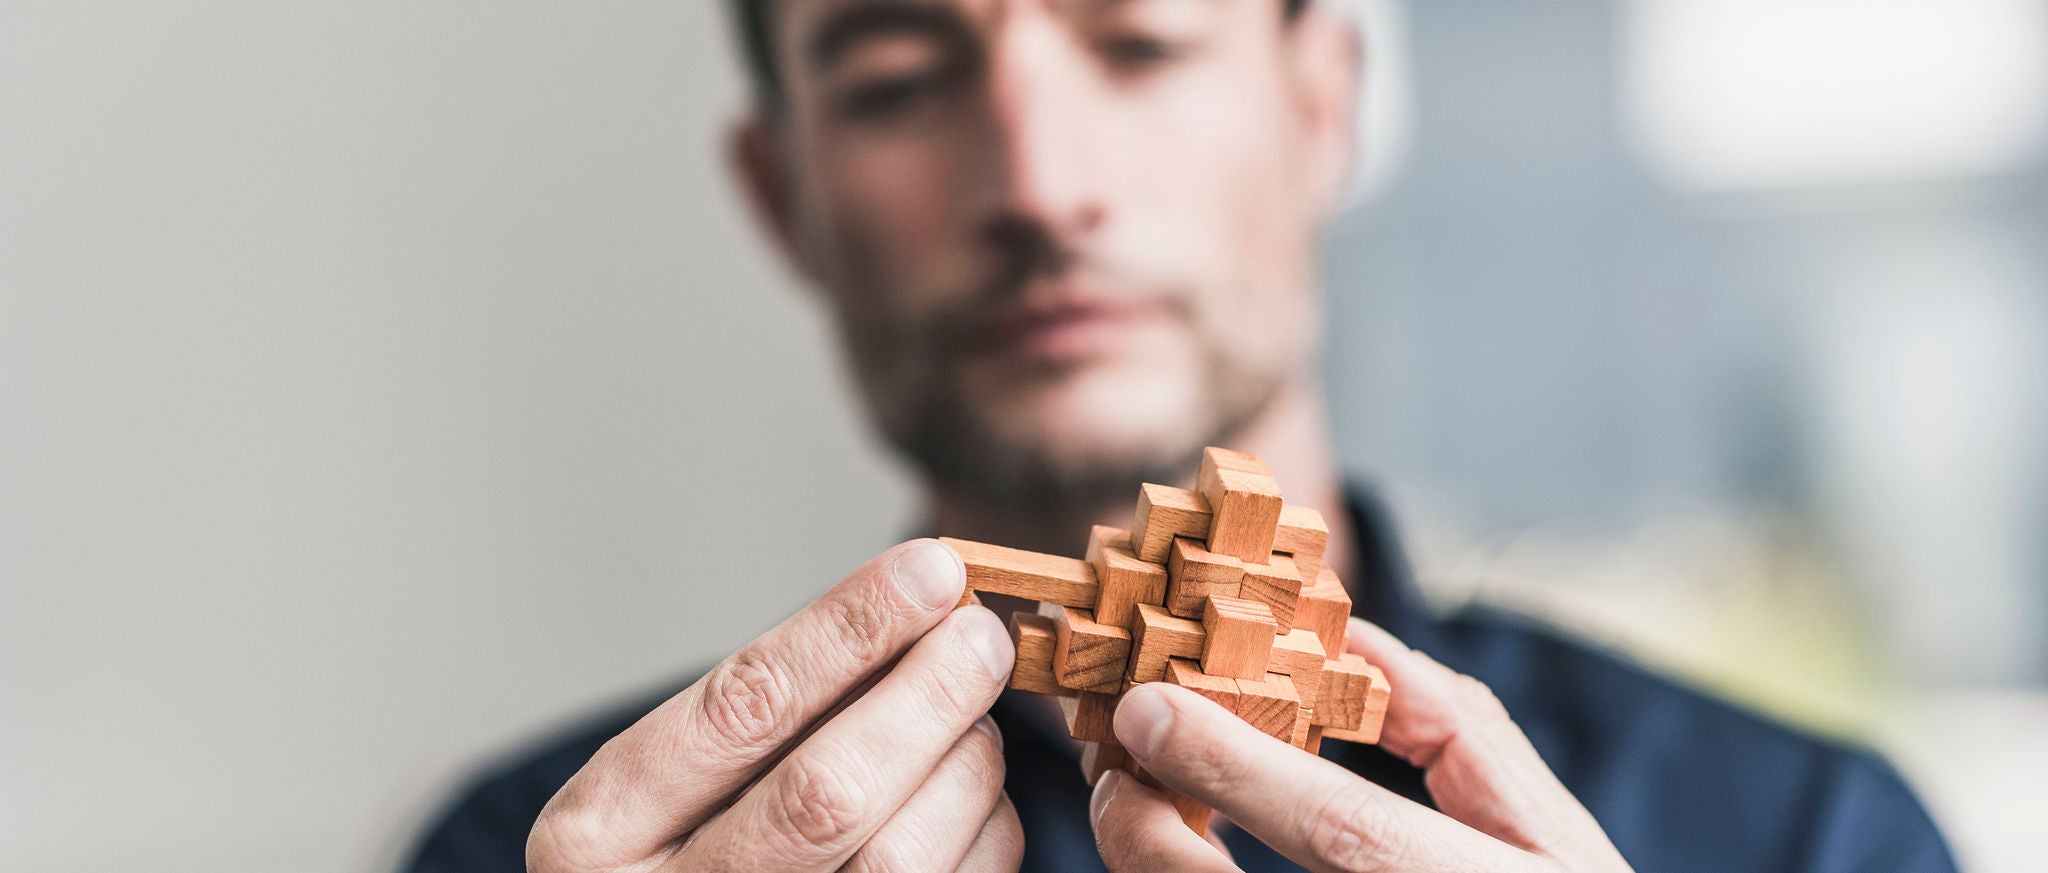 Mature man sitting in office assembling wooden cube puzzle